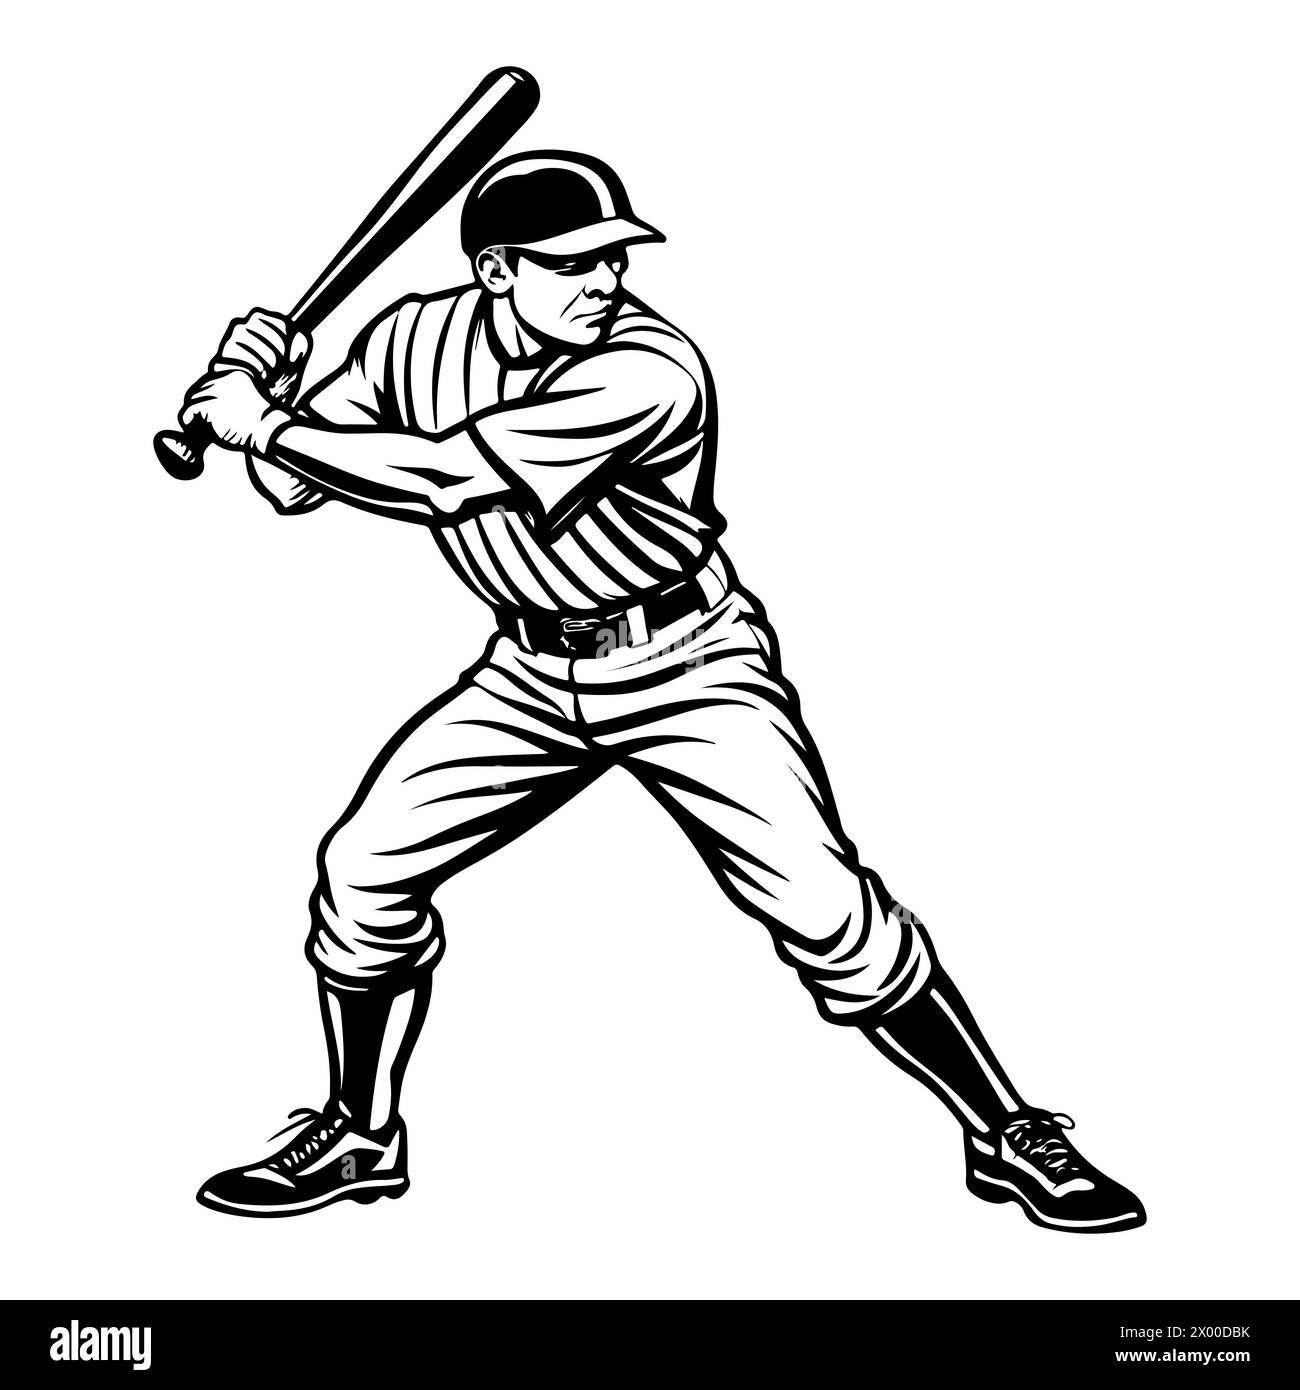 Awesome baseball player black ink transparent vector Stock Vector